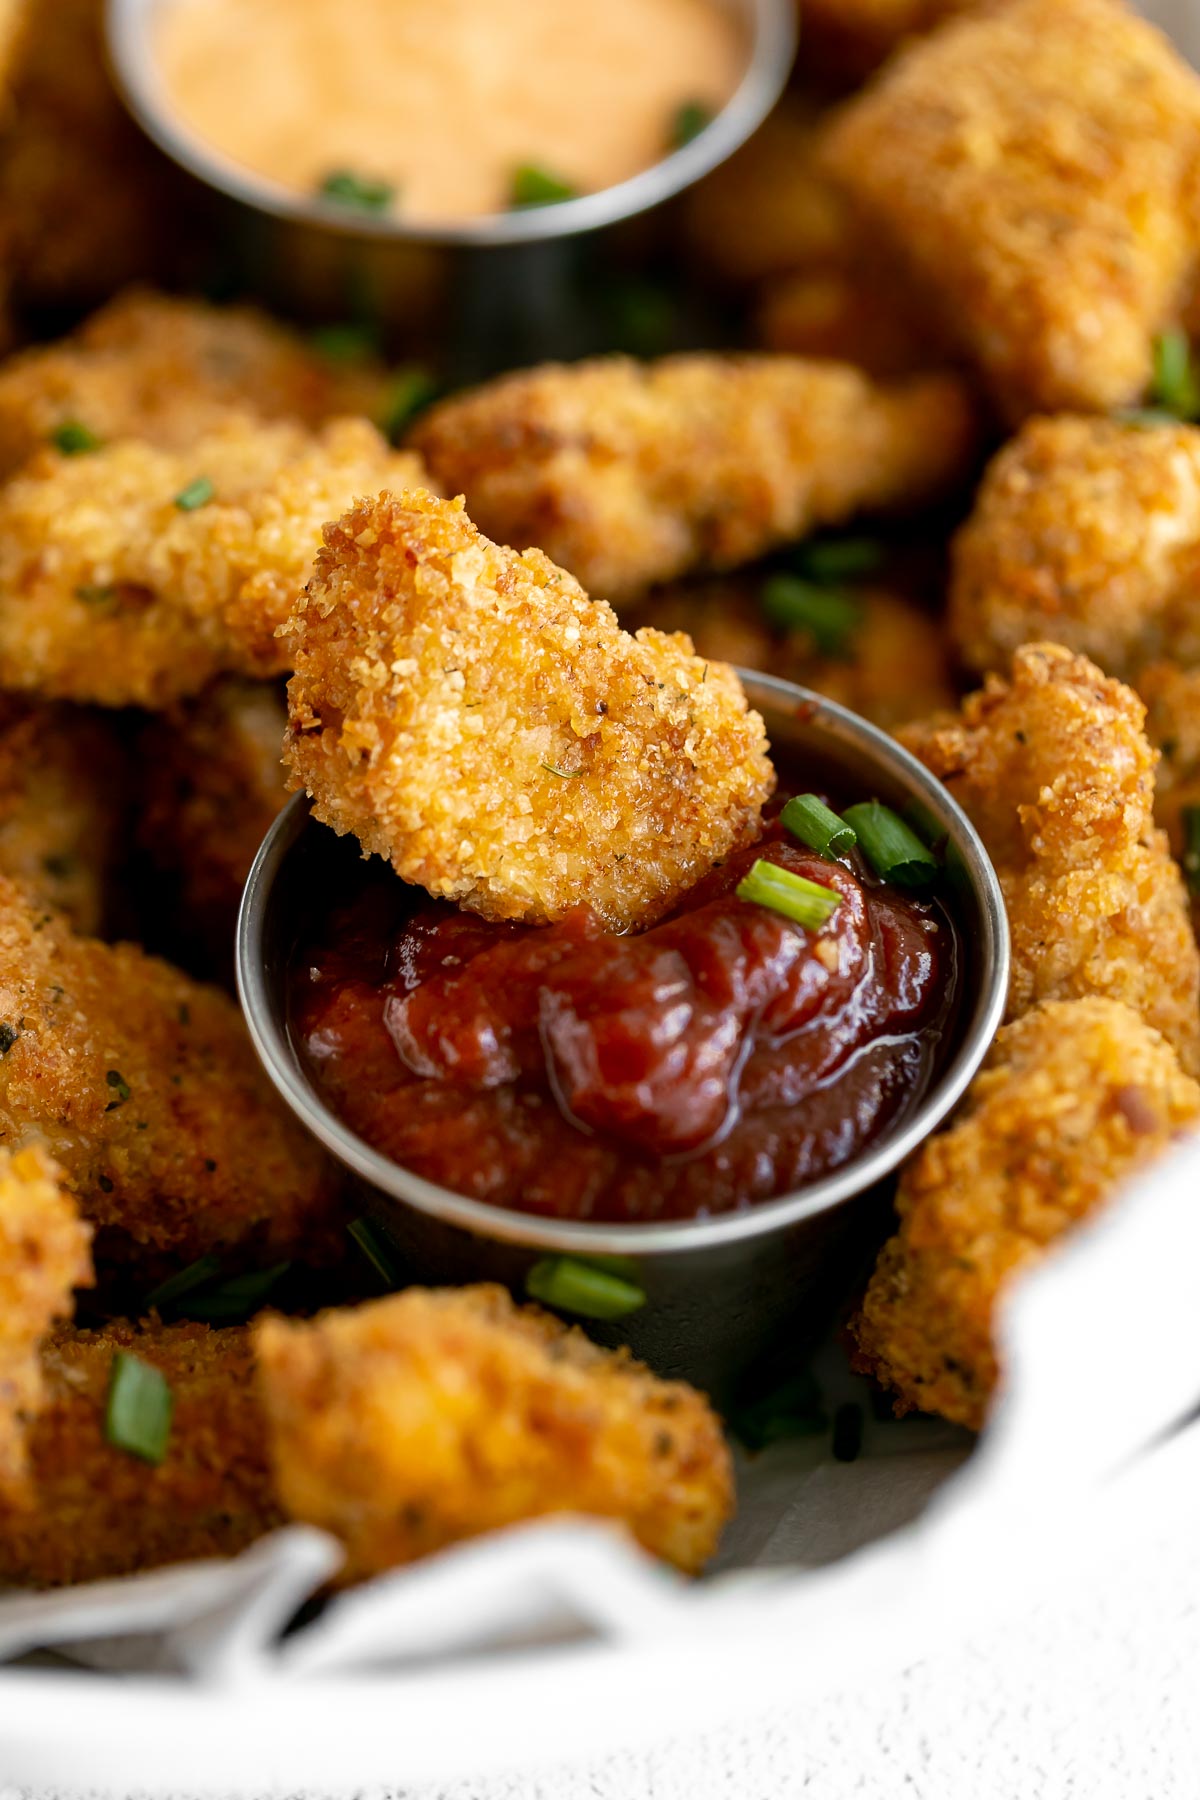 Healthy chicken nugget in a bowl of ketchup with chives.